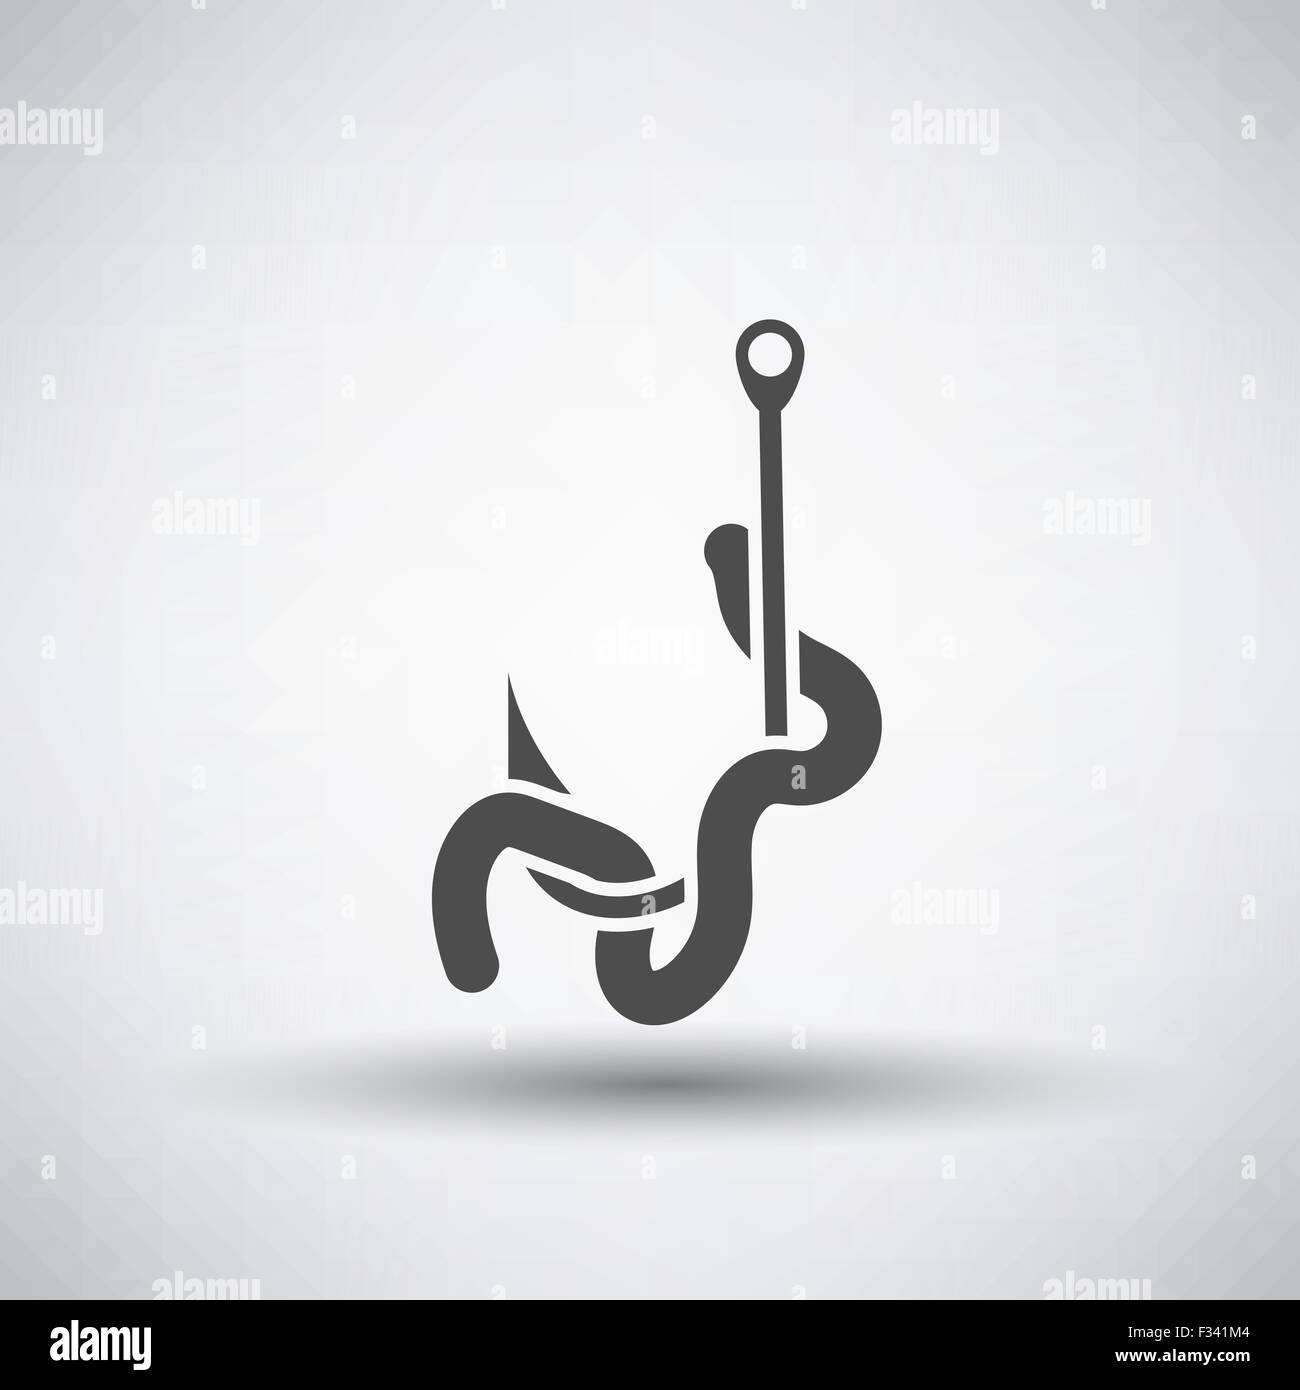 Fishing icon with worm on hook over gray background. Vector illustration. Stock Vector